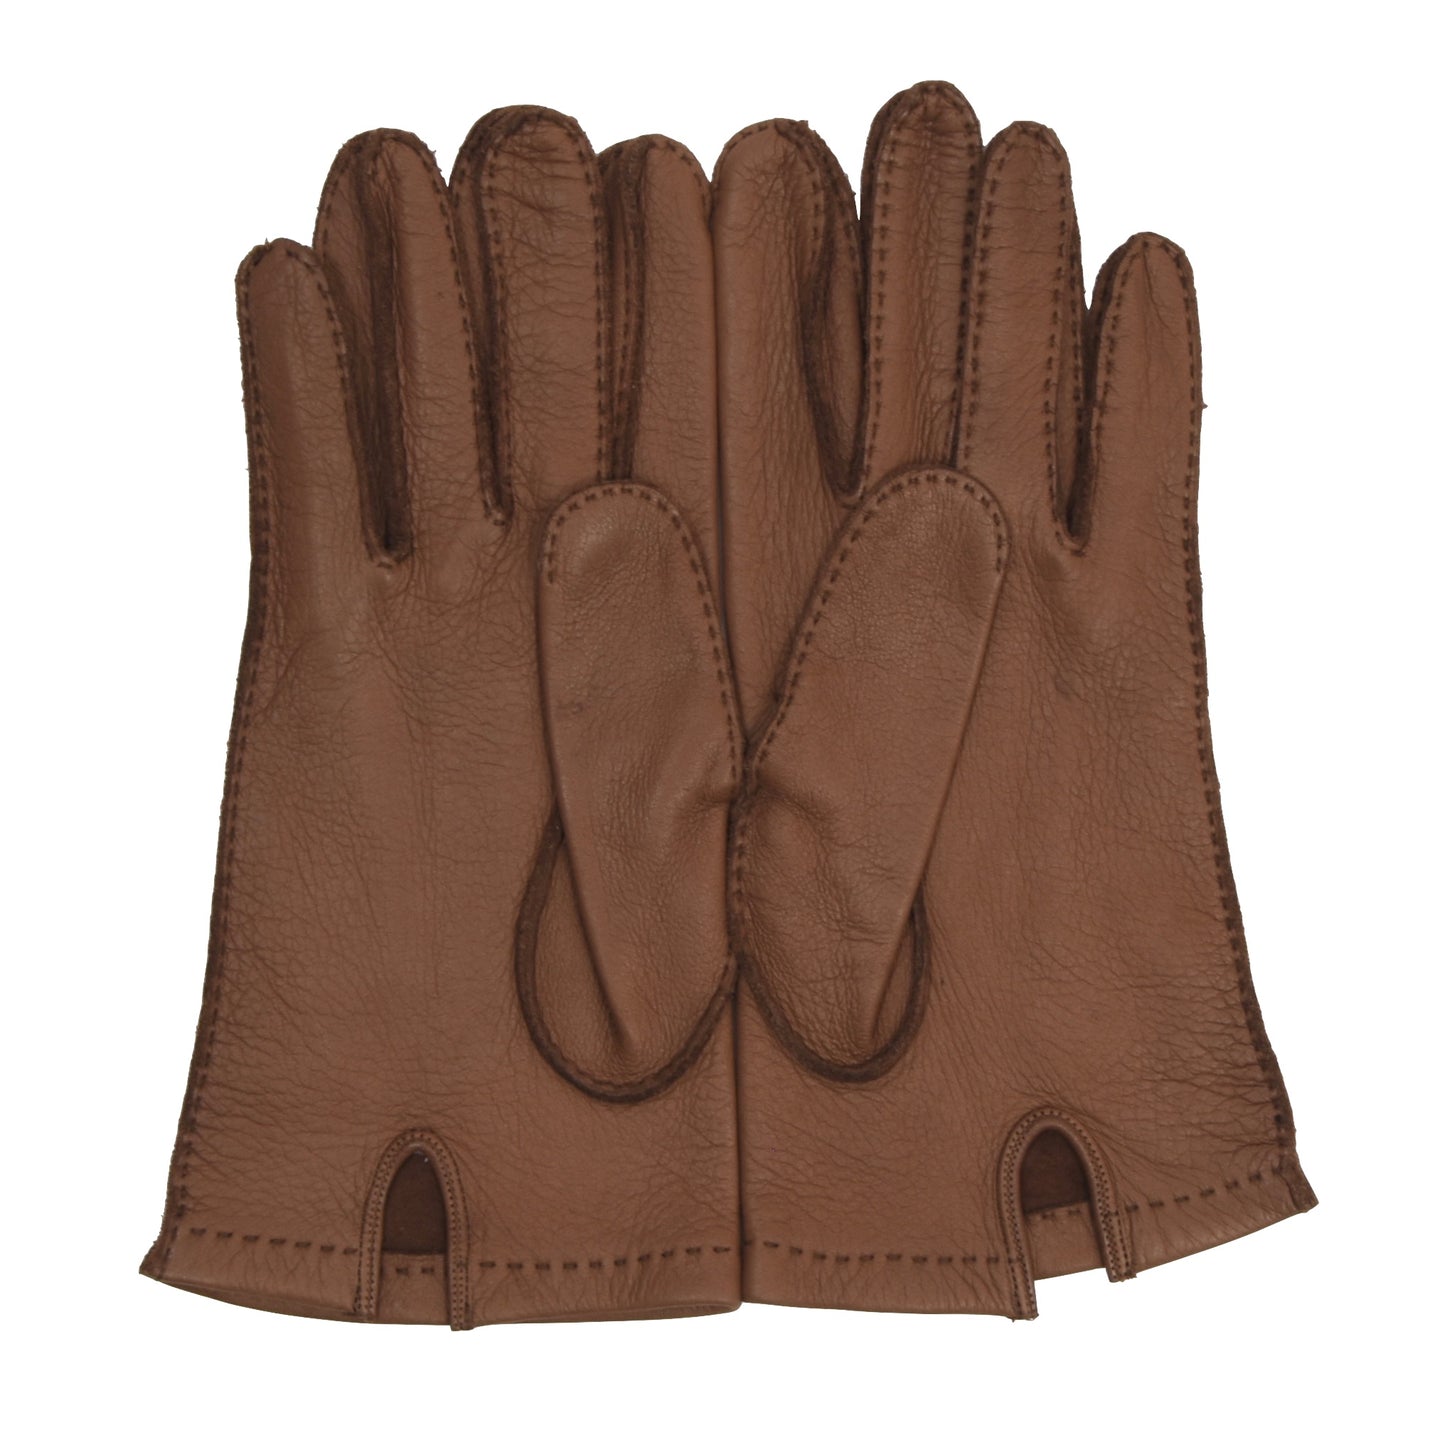 Butter Soft Unlined Leather Gloves Size 9.5 - Brown